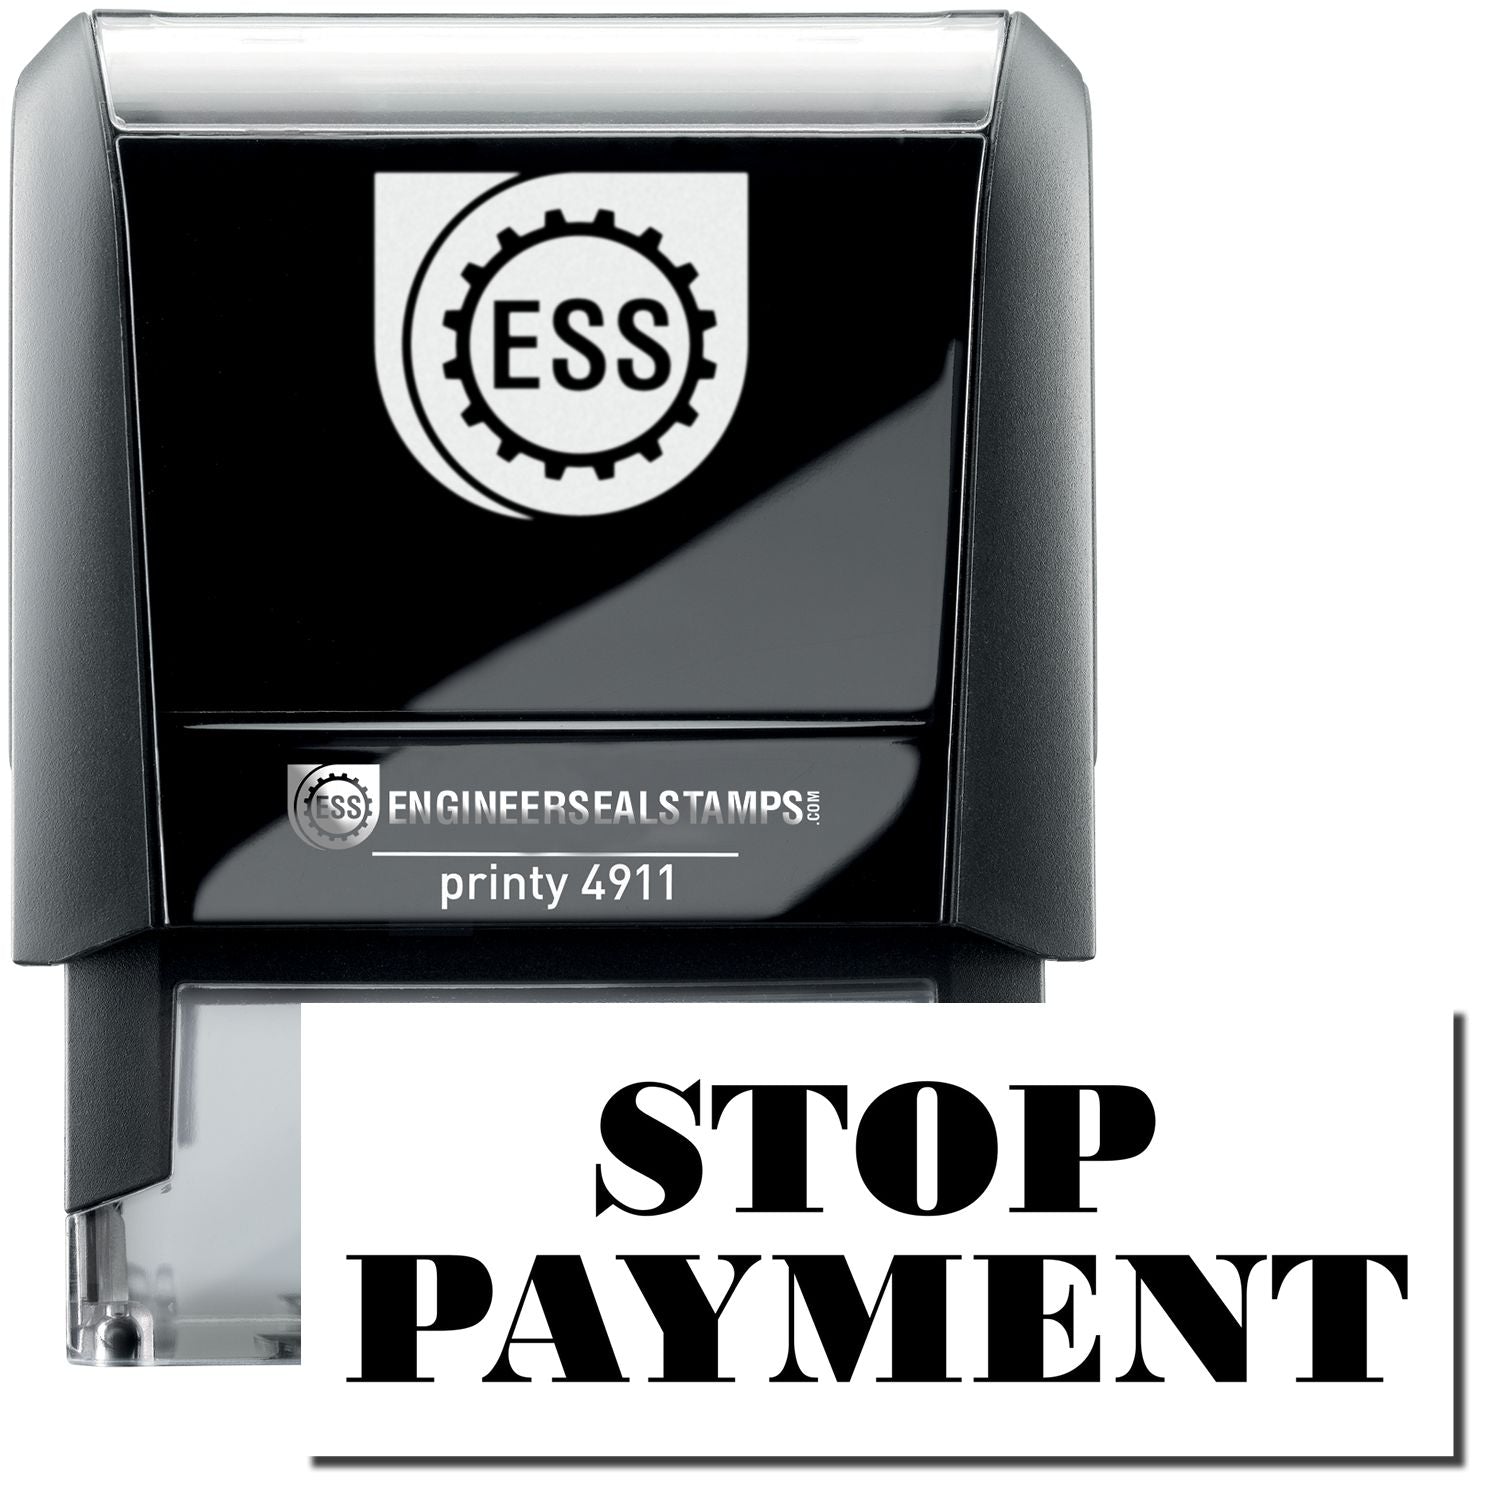 A self-inking stamp with a stamped image showing how the text "STOP PAYMENT" is displayed after stamping.